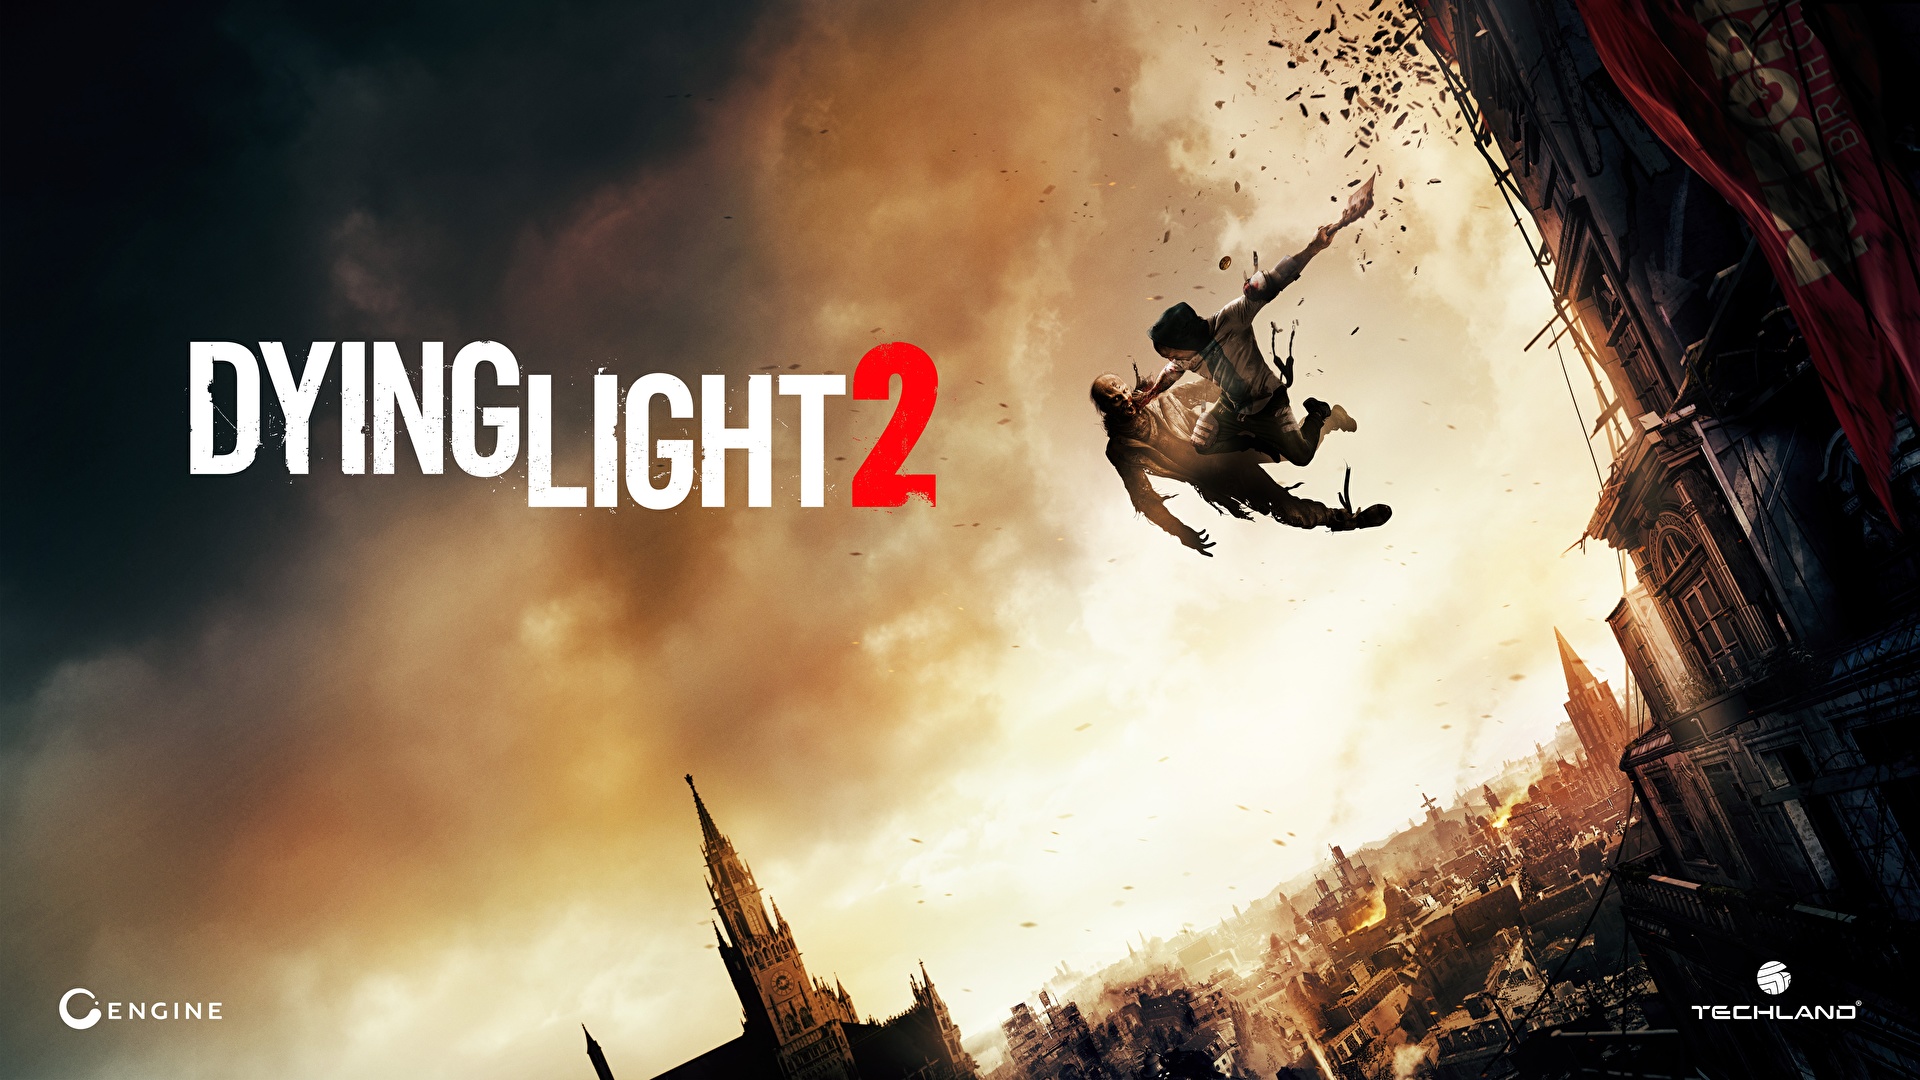 Dying Light 2 will include a new photo mode, a new game and other new features.